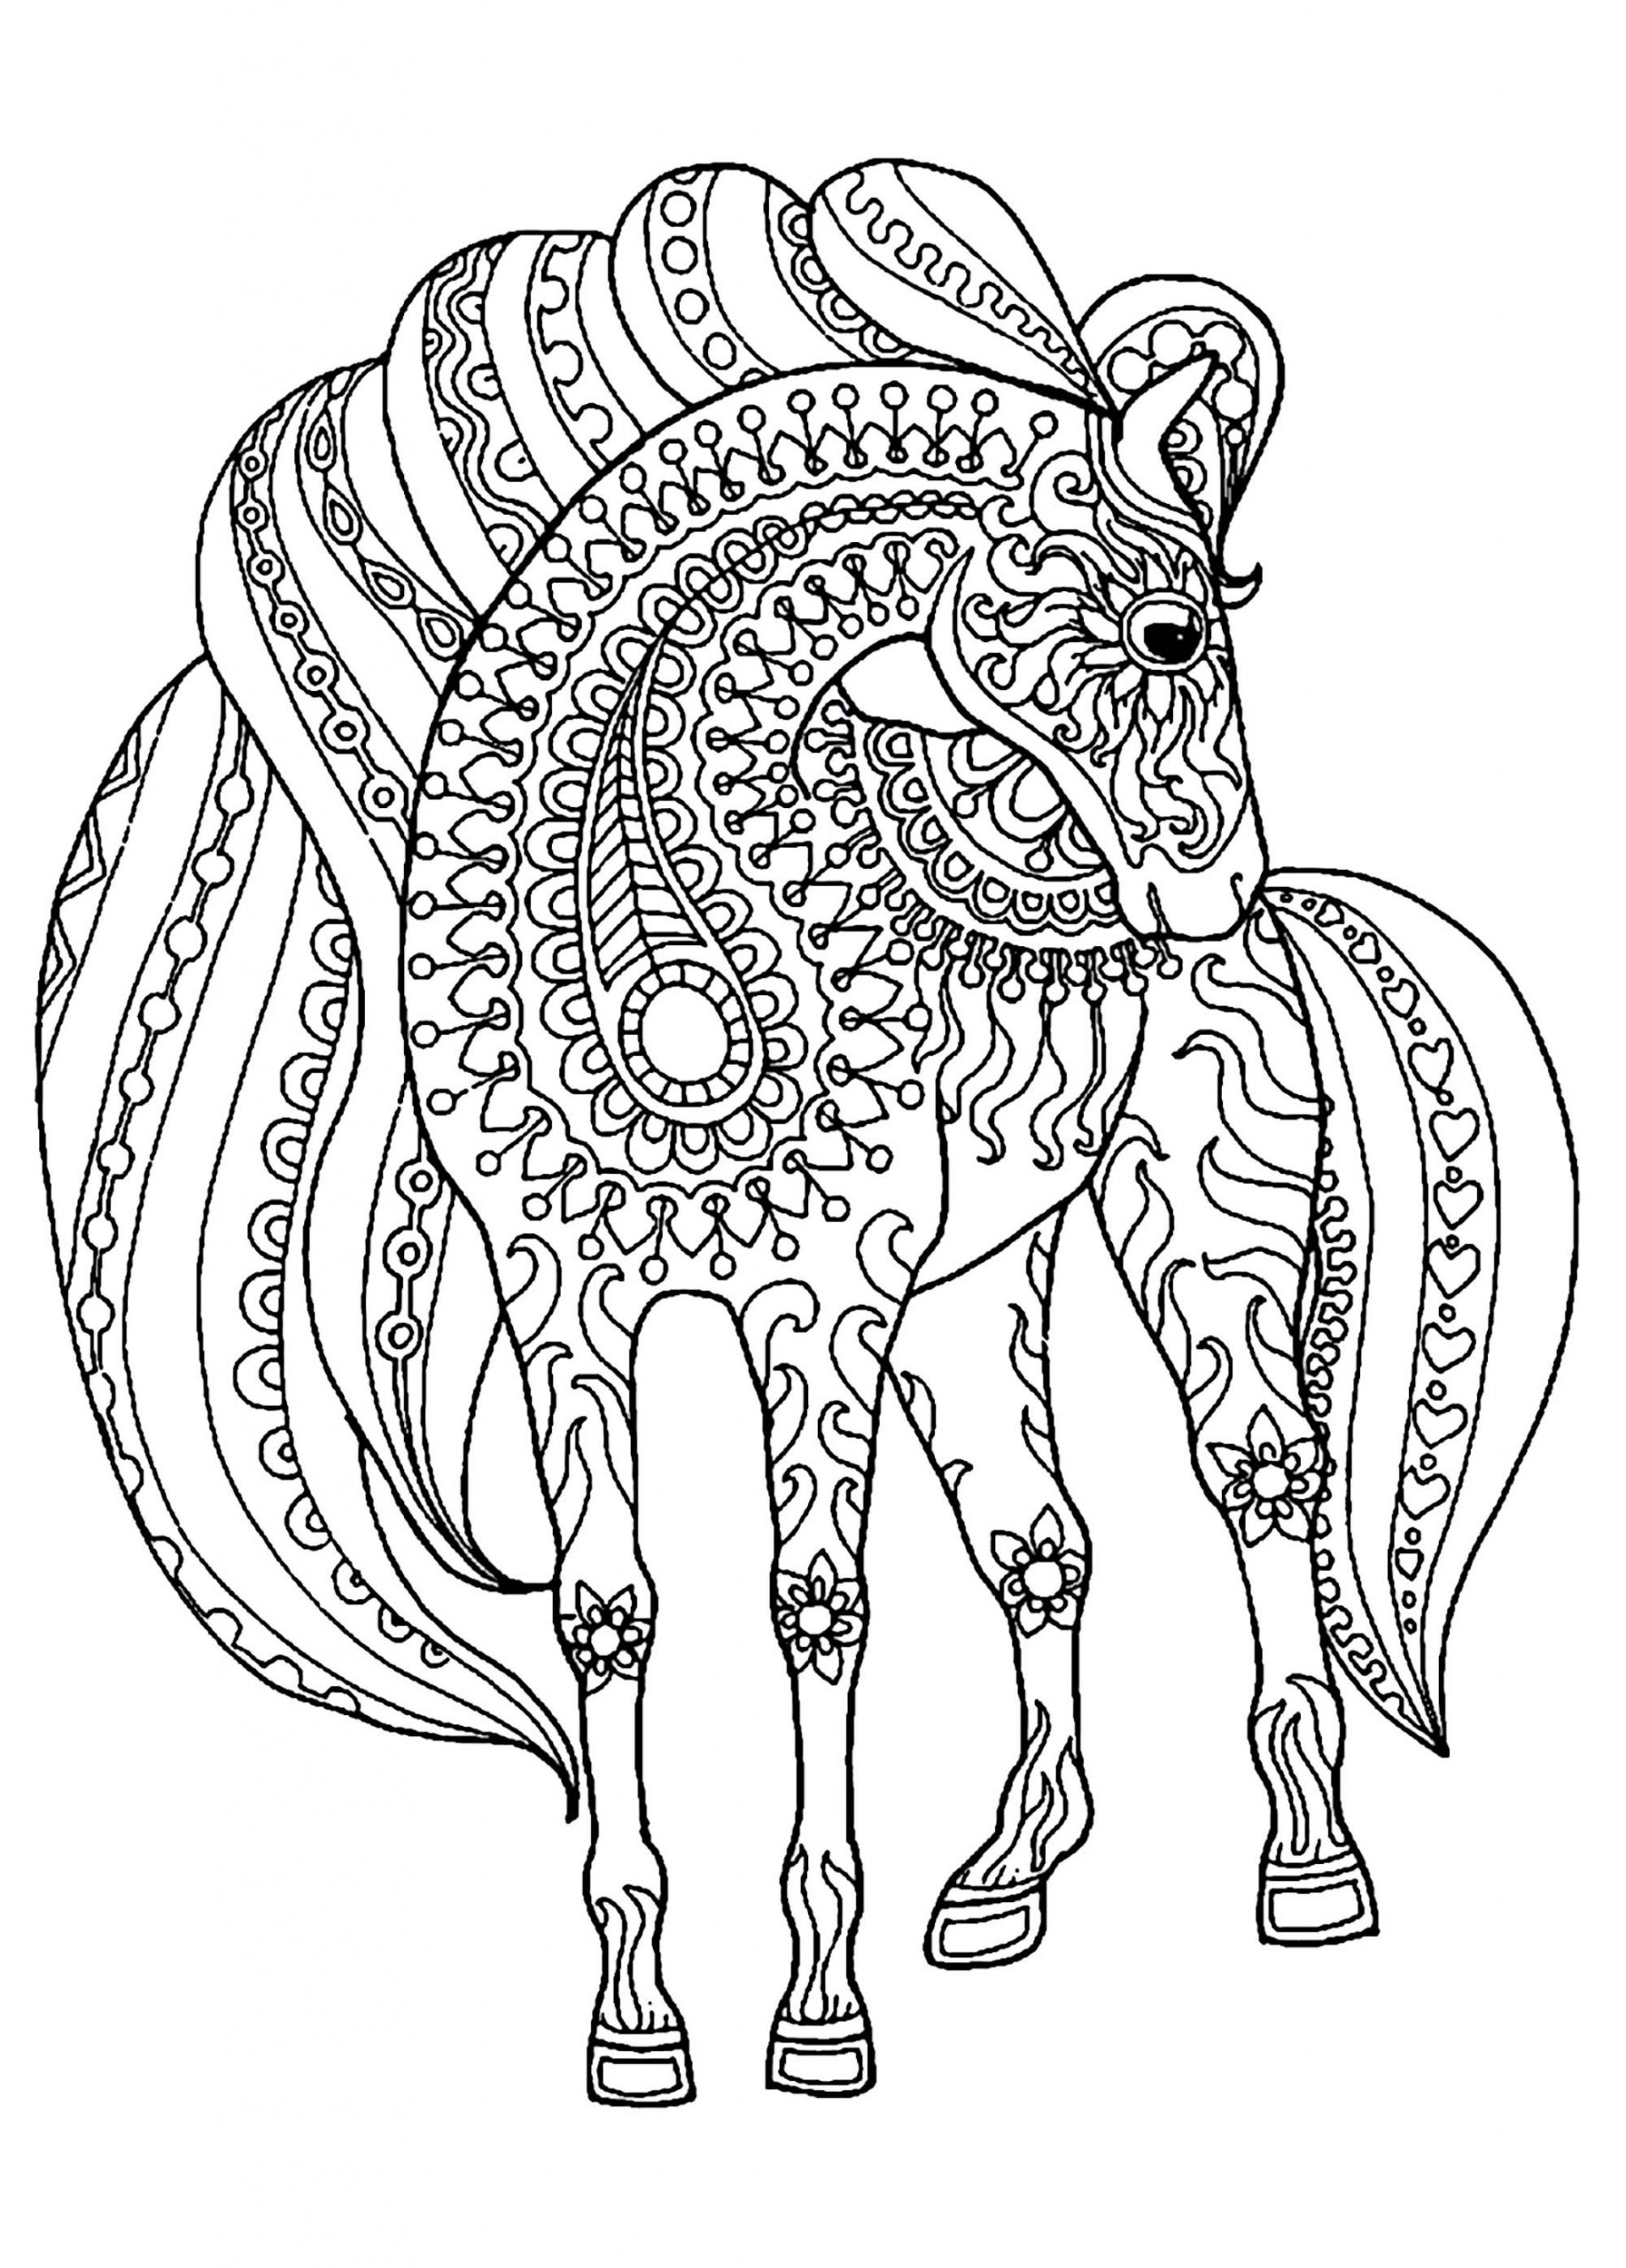 Adult Coloring Book Horse
 Horse simple zentangle patterns Horses Adult Coloring Pages